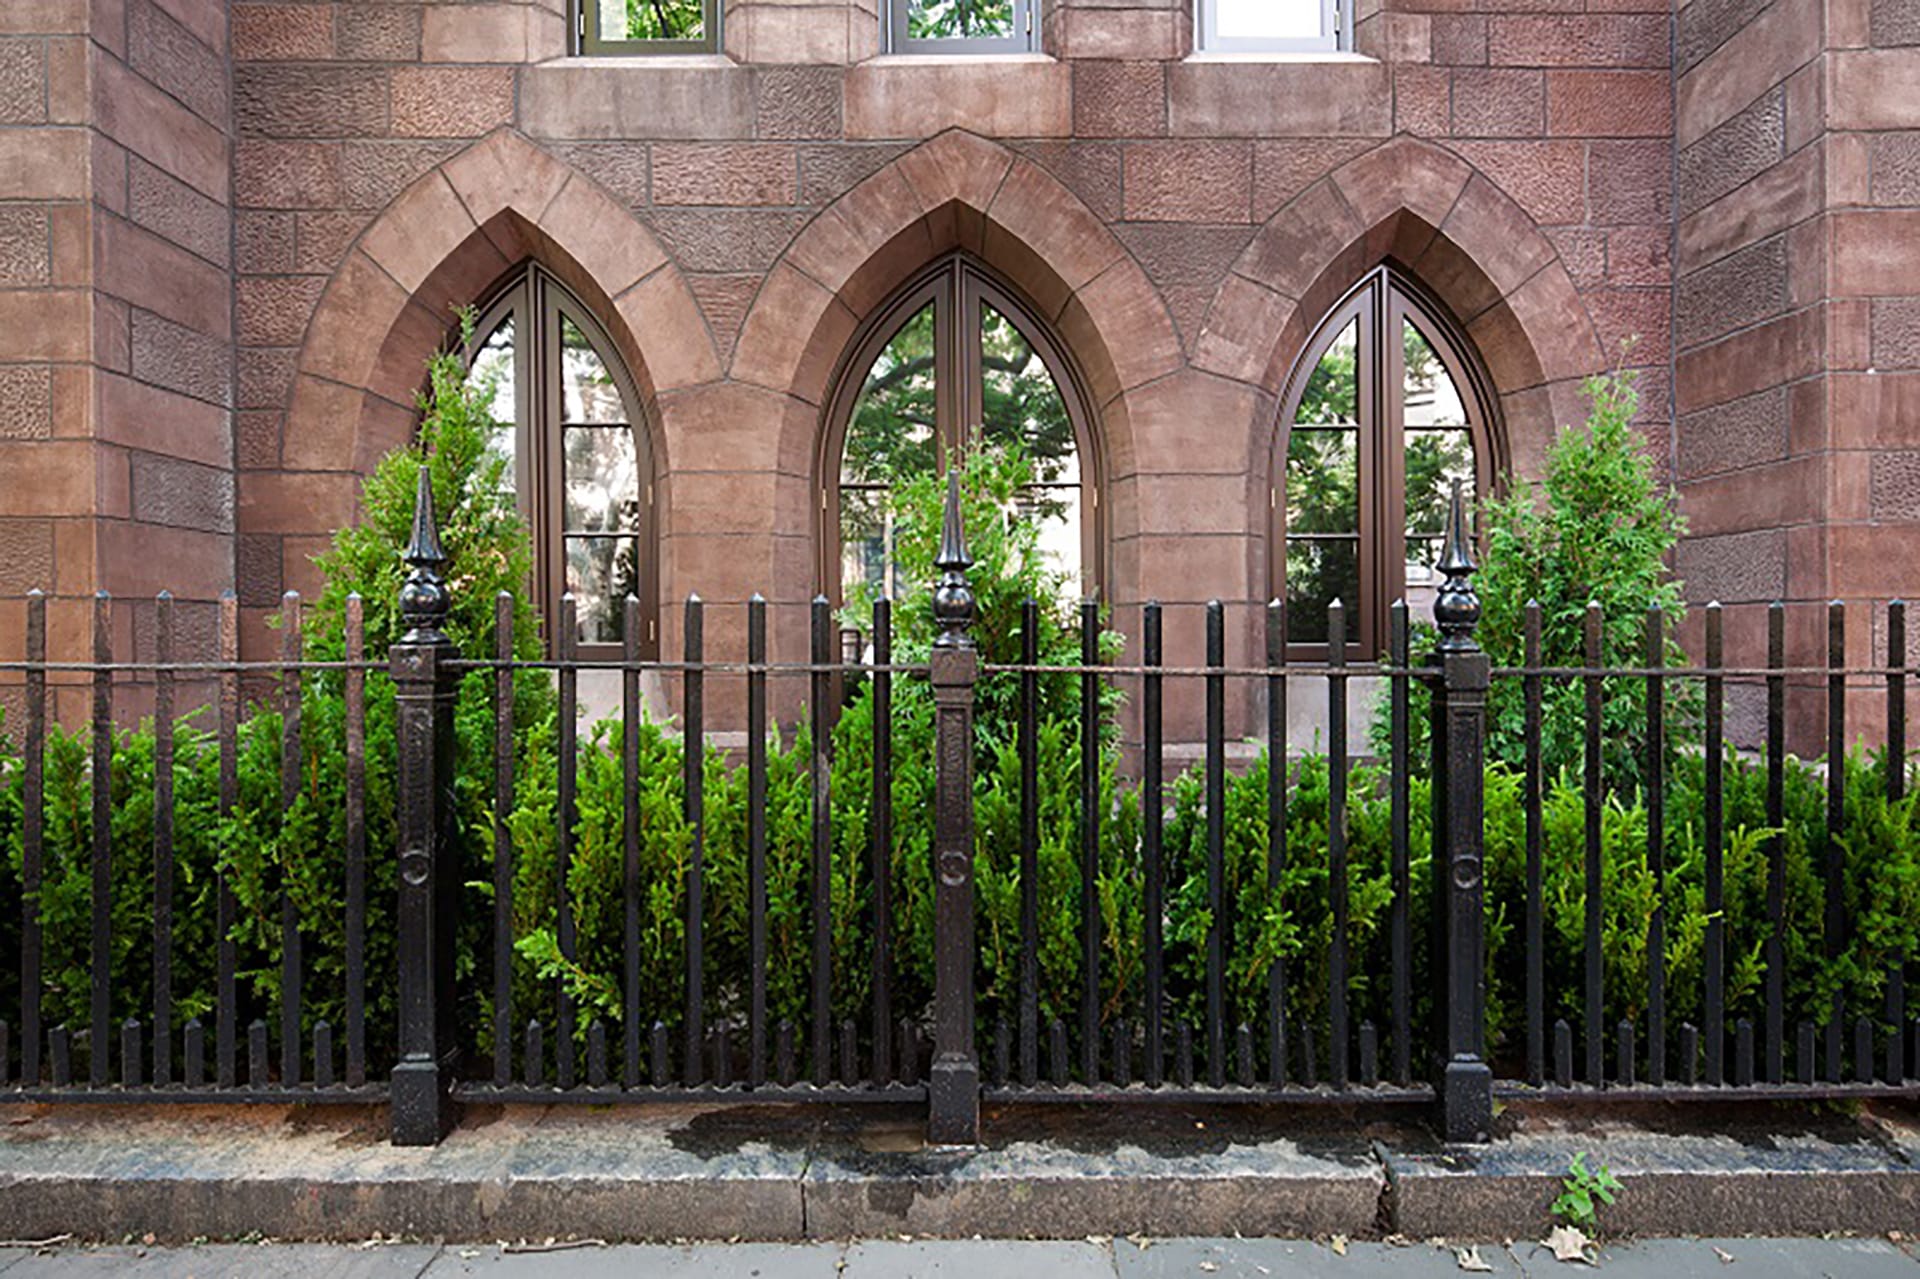 Exterior of a Brooklyn church after our renovation, with a restored fence and brownstone façade